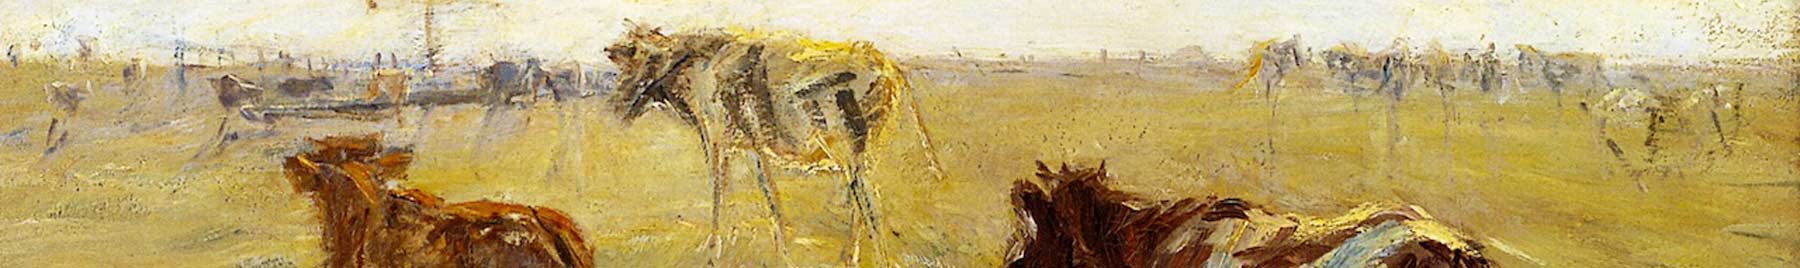 Detail of &lsquo;Cattle Seen Against the Sun on the Island of Saltholm&rsquo; by Theodor Philipsen,1892